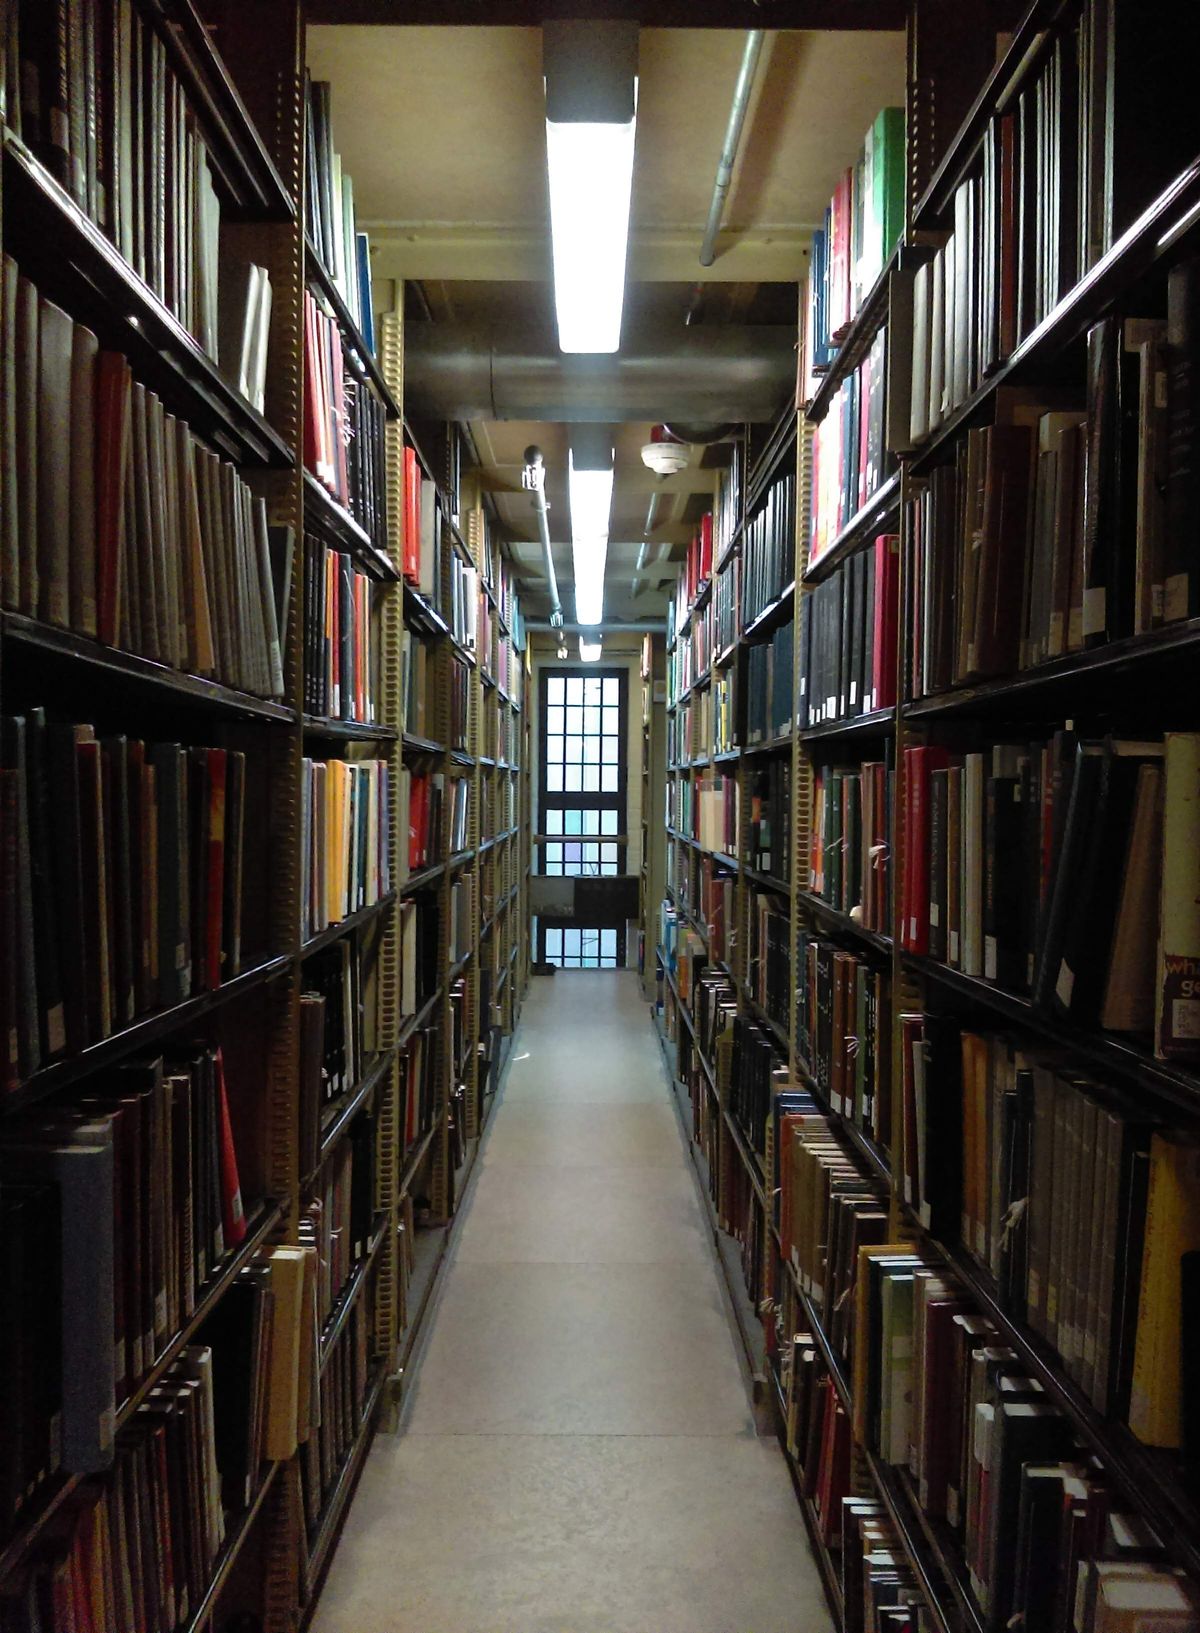 The Stacks: Conversations on Research During COVID